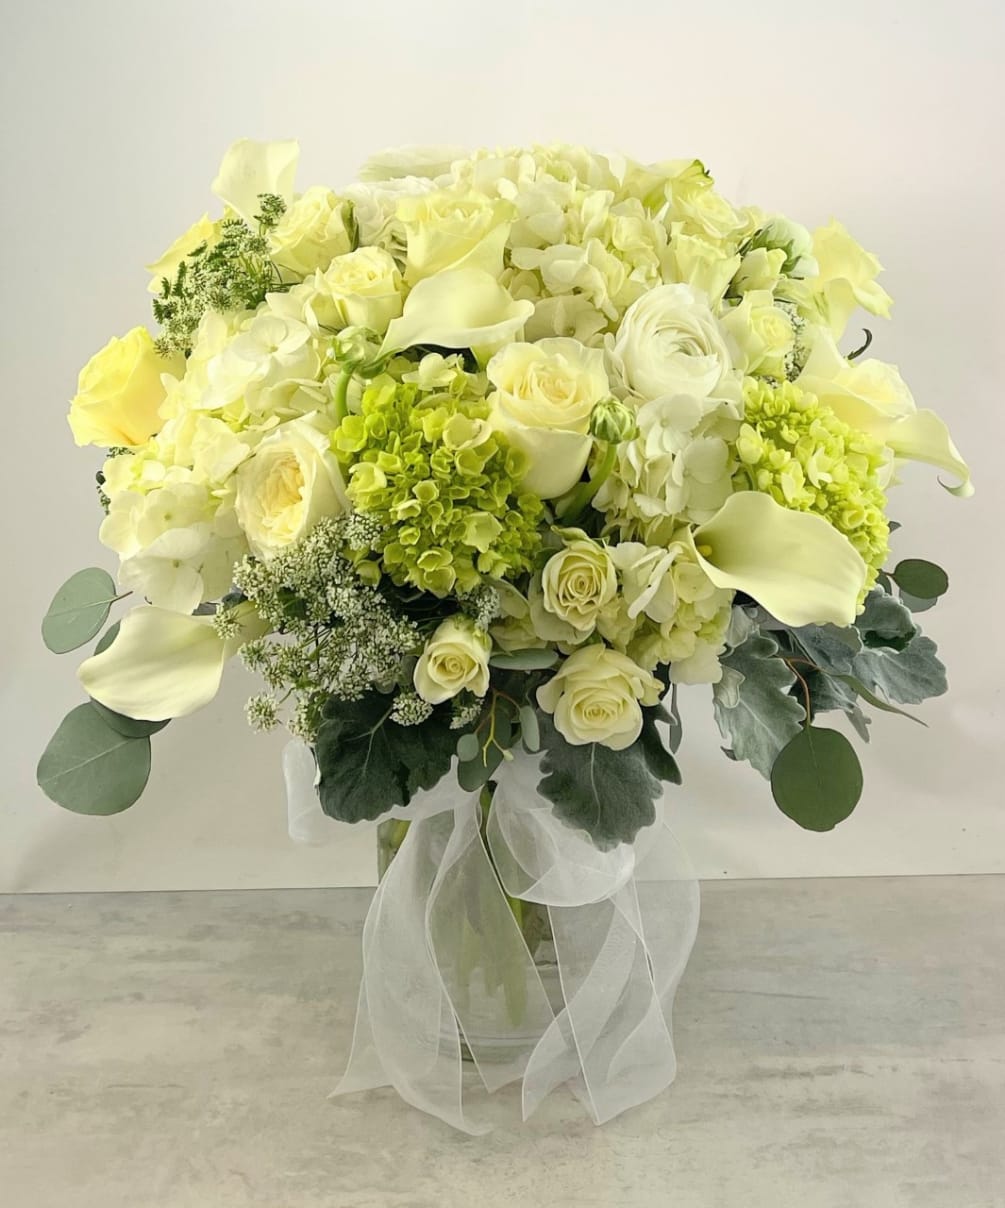 Beauty, grace and elegance are embodied in this artfully designed bouquet. Whether